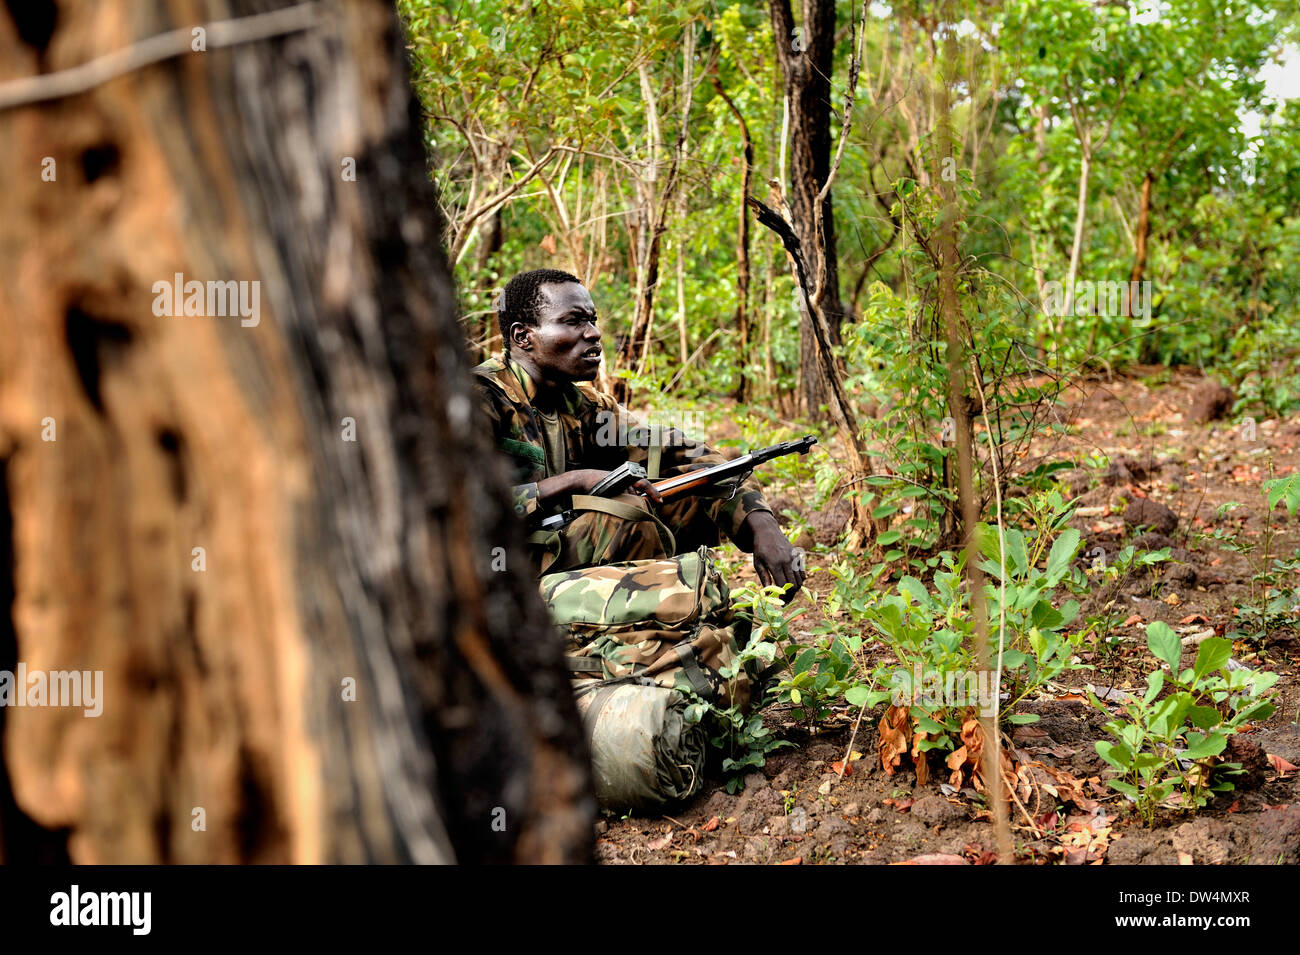 Ugandan soldiers of the Uganda People's Defence Force (UPDF) patrol through the Central African jungle during an operation to hunt notorious Lord's Resistance Army (LRA) leader Joseph Kony. The LRA is a Christian militant rebel group. Stock Photo